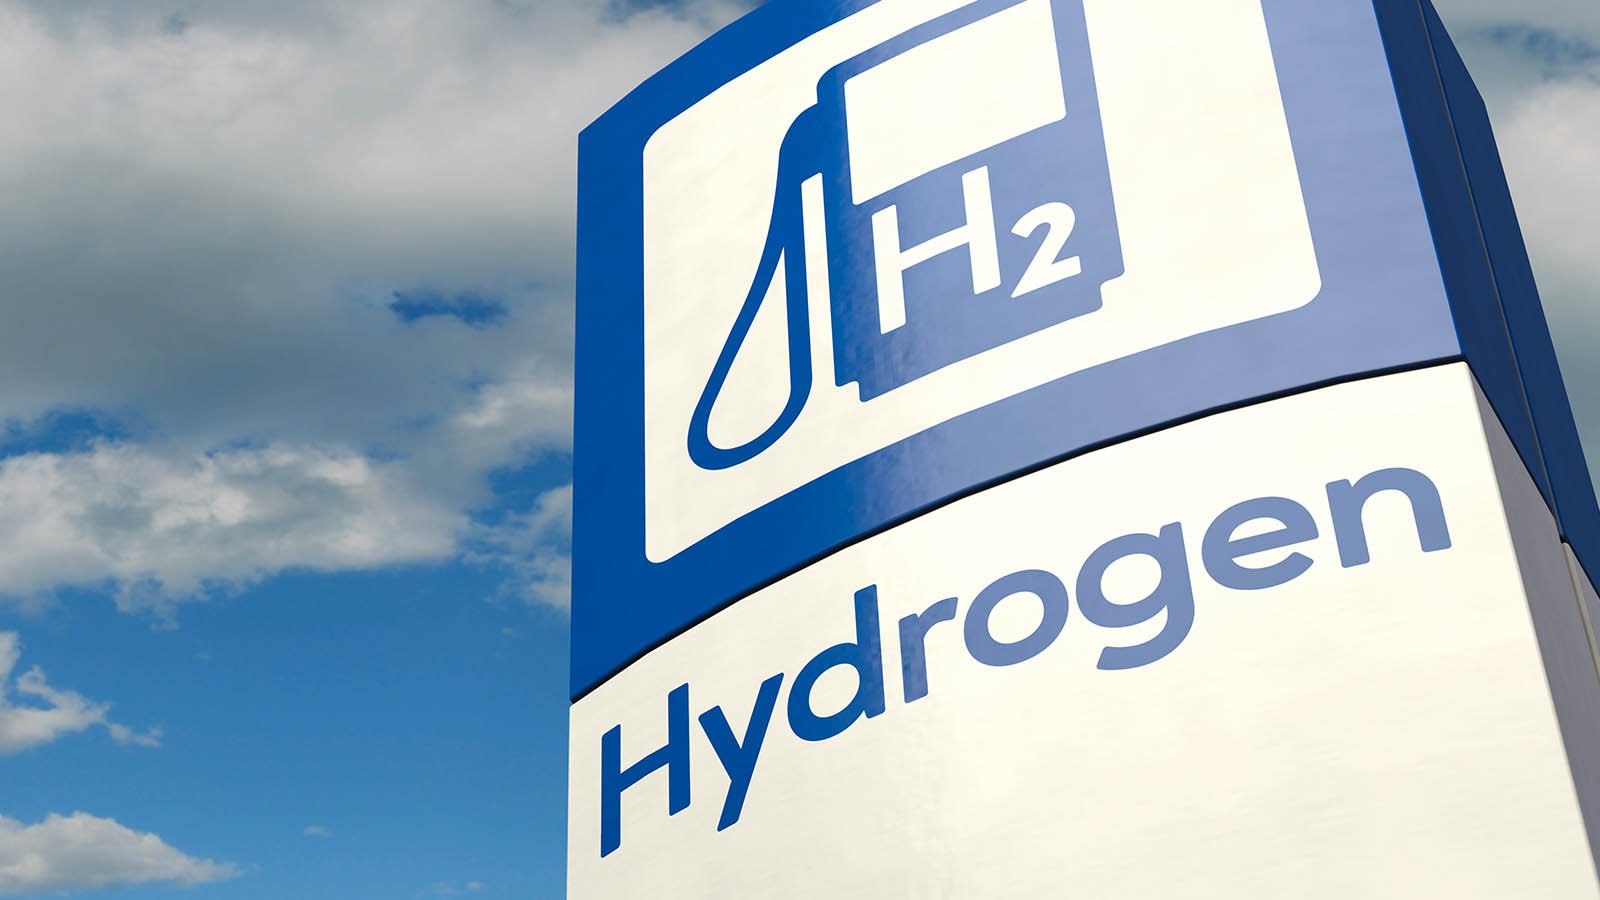 An image of a hydrogen fueling station against a blue sky representing ADN.